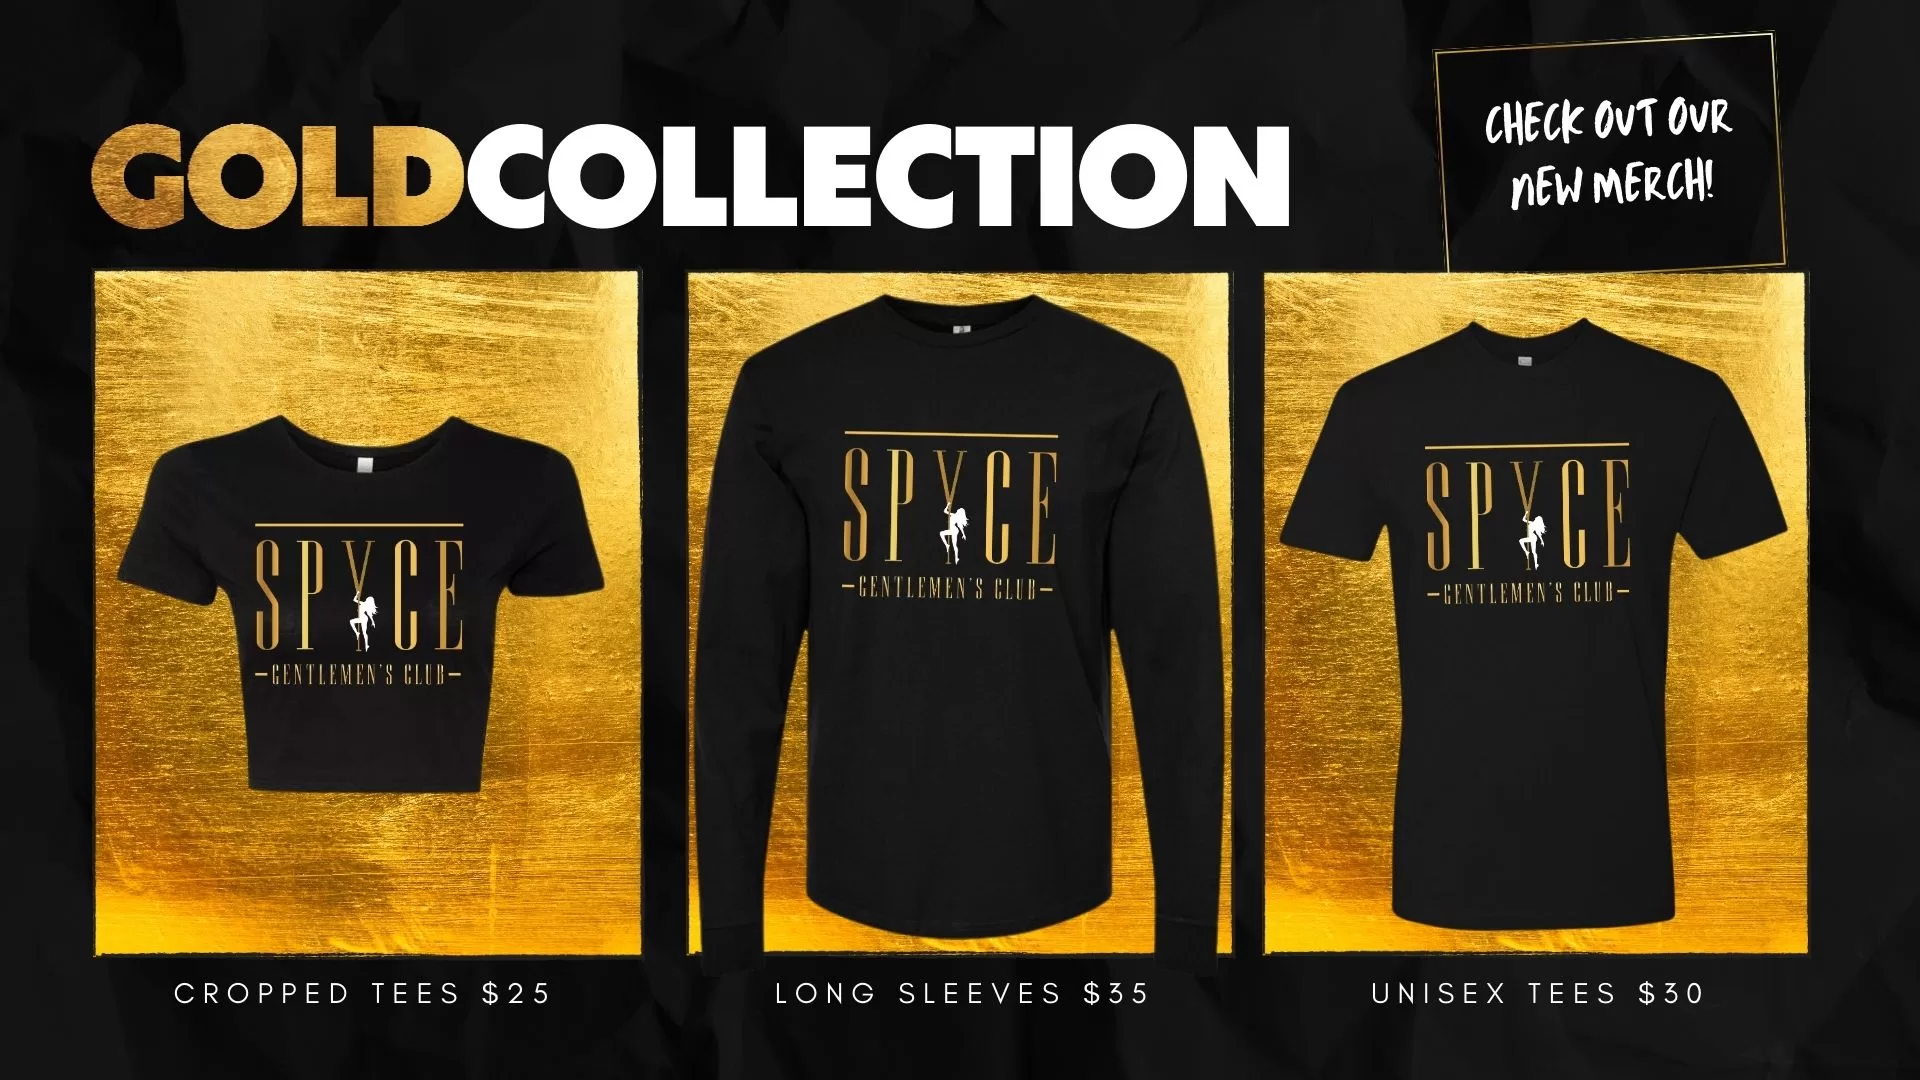 GOLD COLLECTION